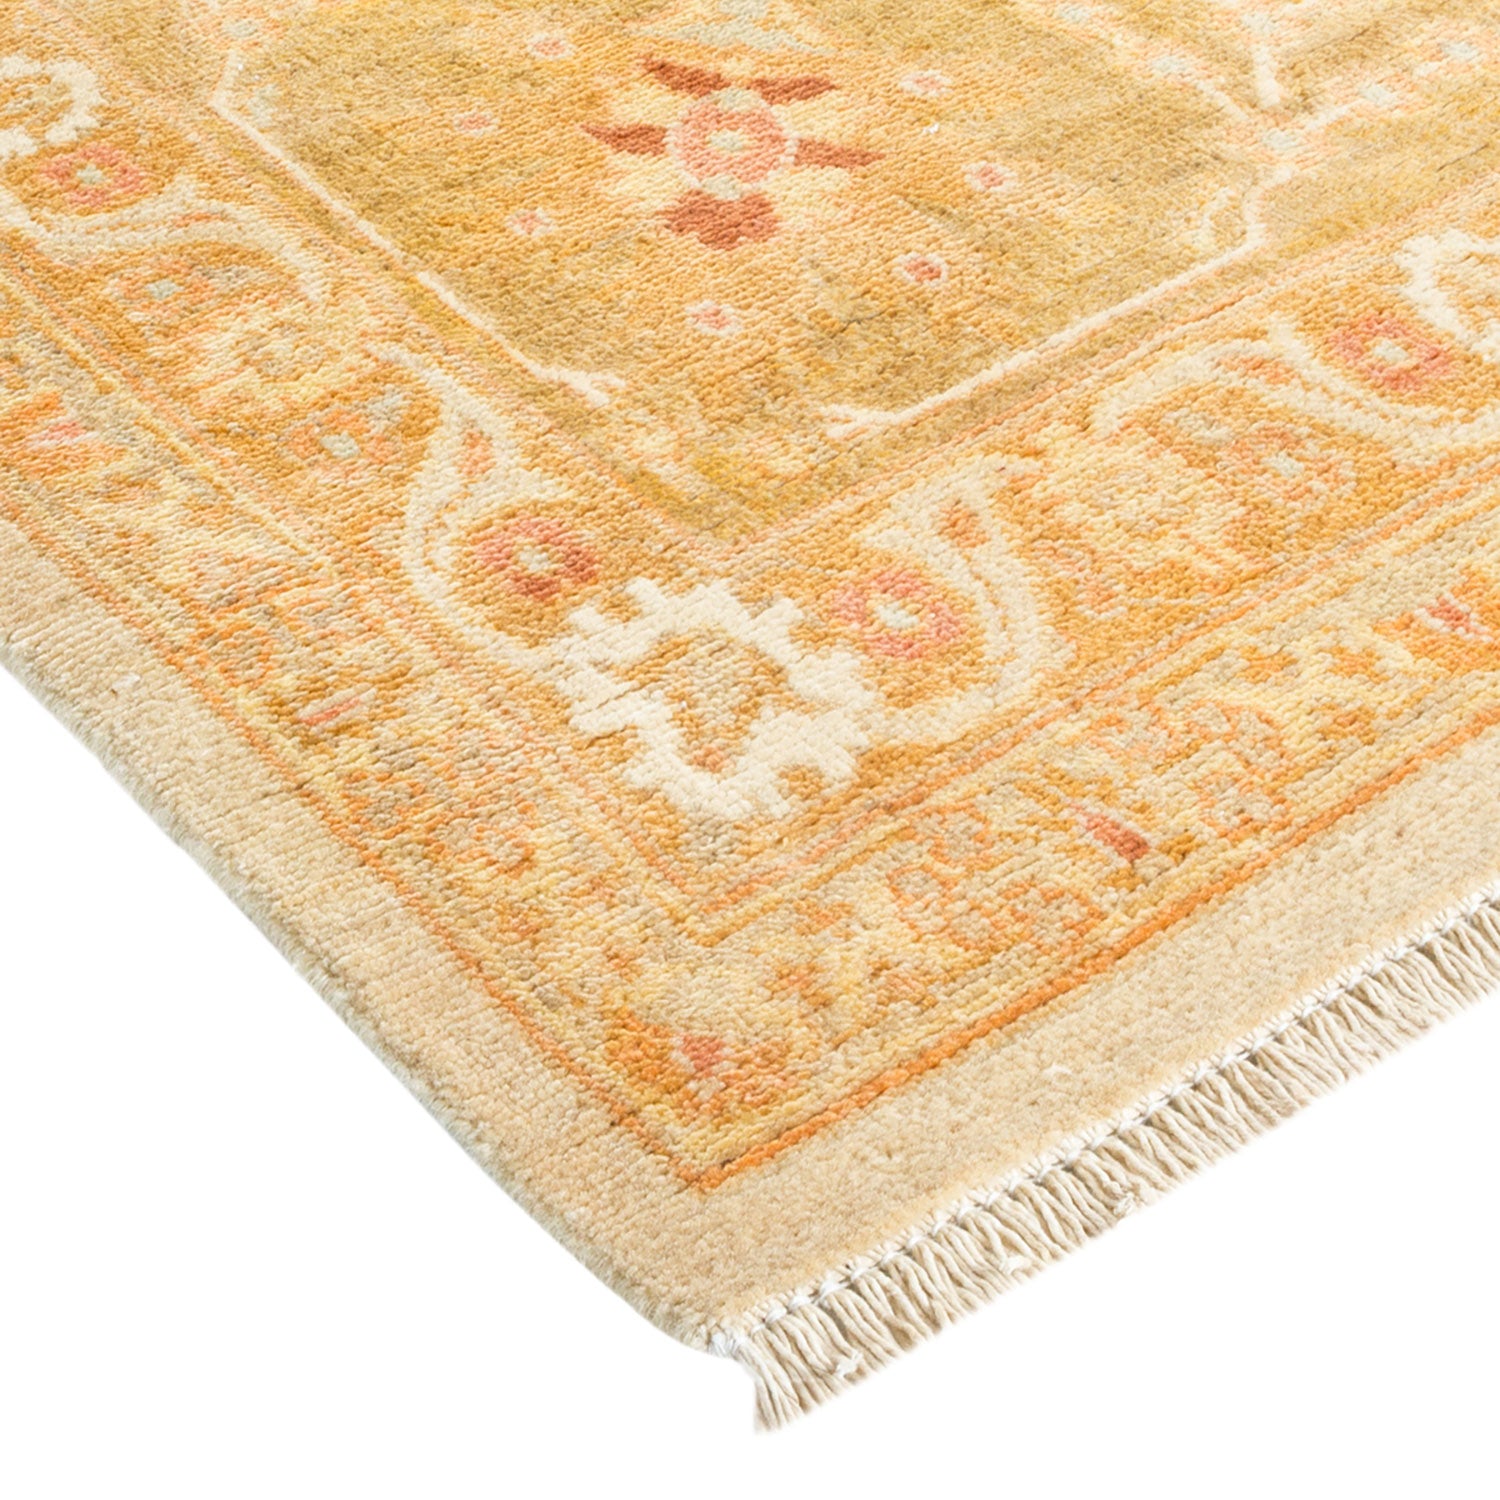 Close-up of a vintage-style rug with intricate patterns and fringe.